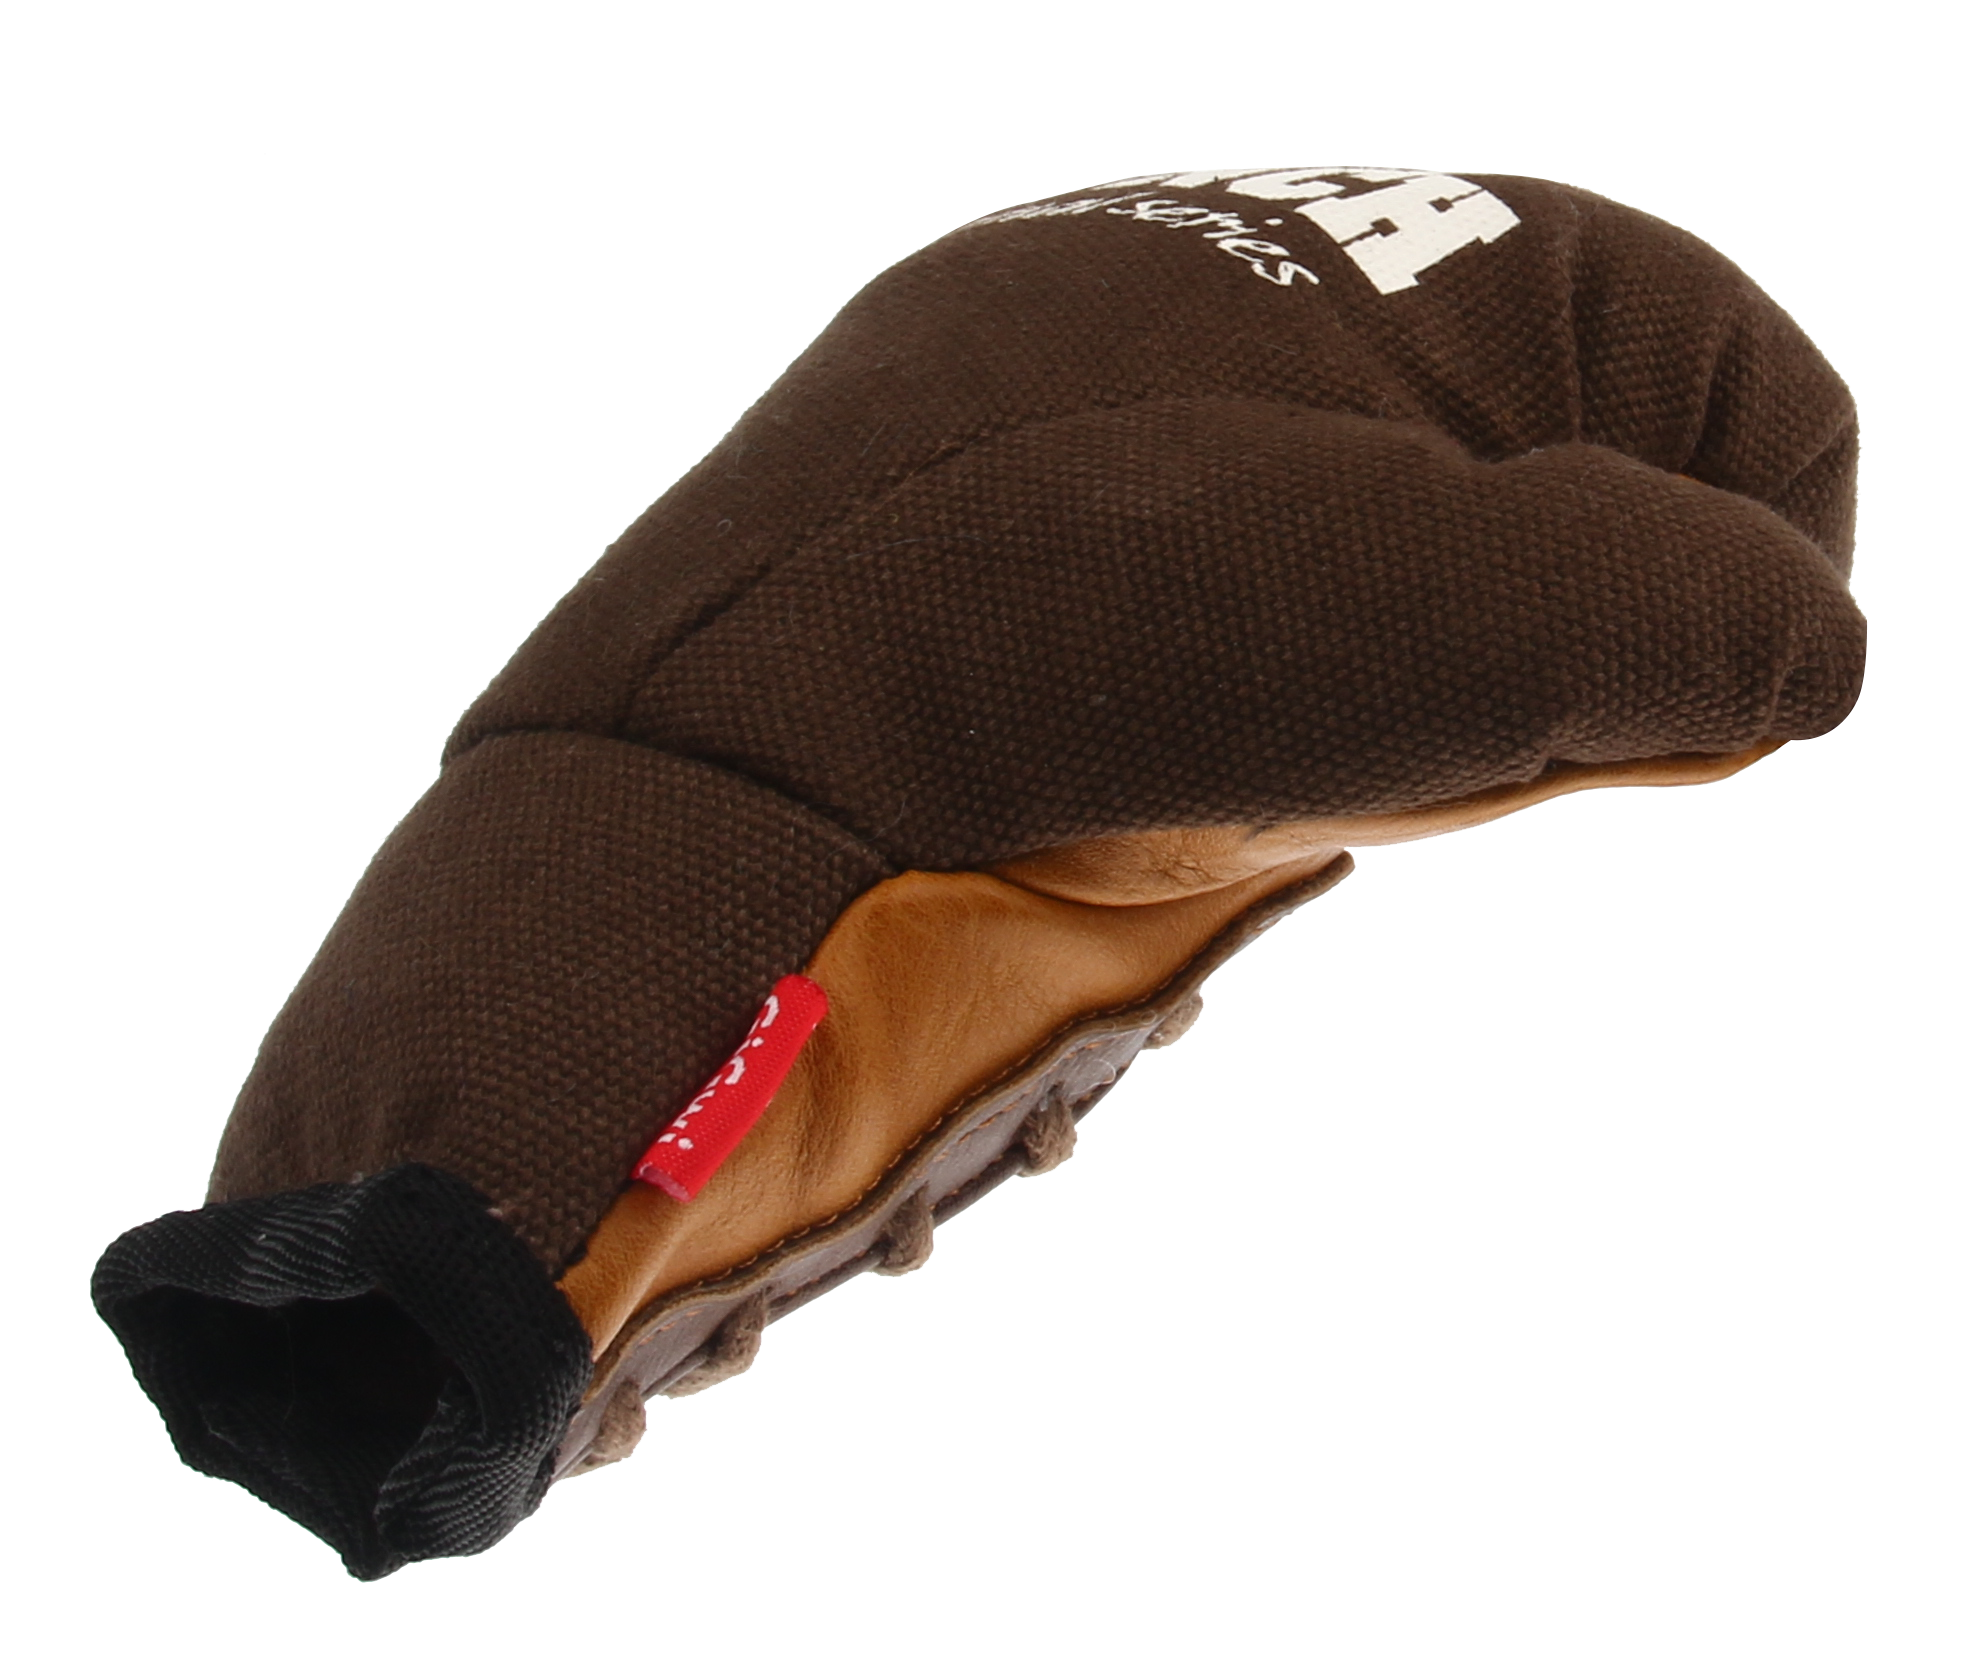 Zoom GiGwi Heavy Punch Dog Toy - Boxing Glove - Brown